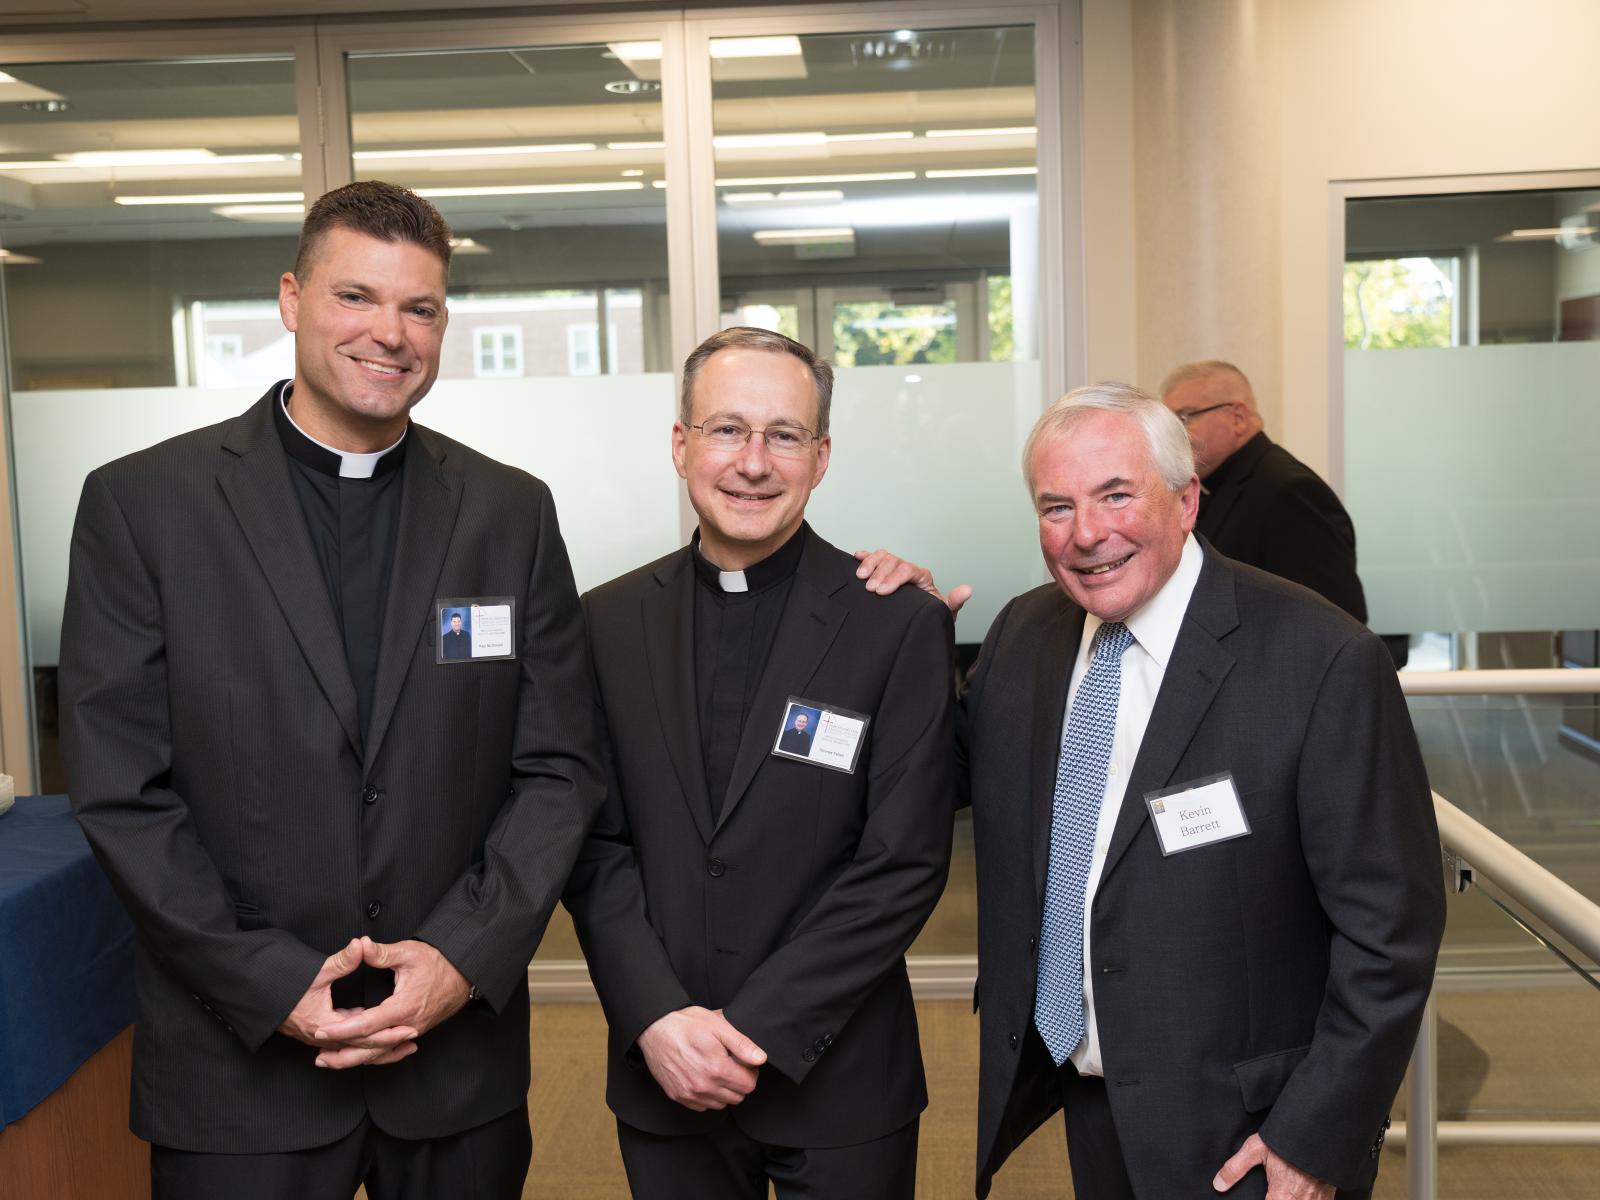 41st Annual Lawn Party Raises $350,000 for Priestly Formation 11